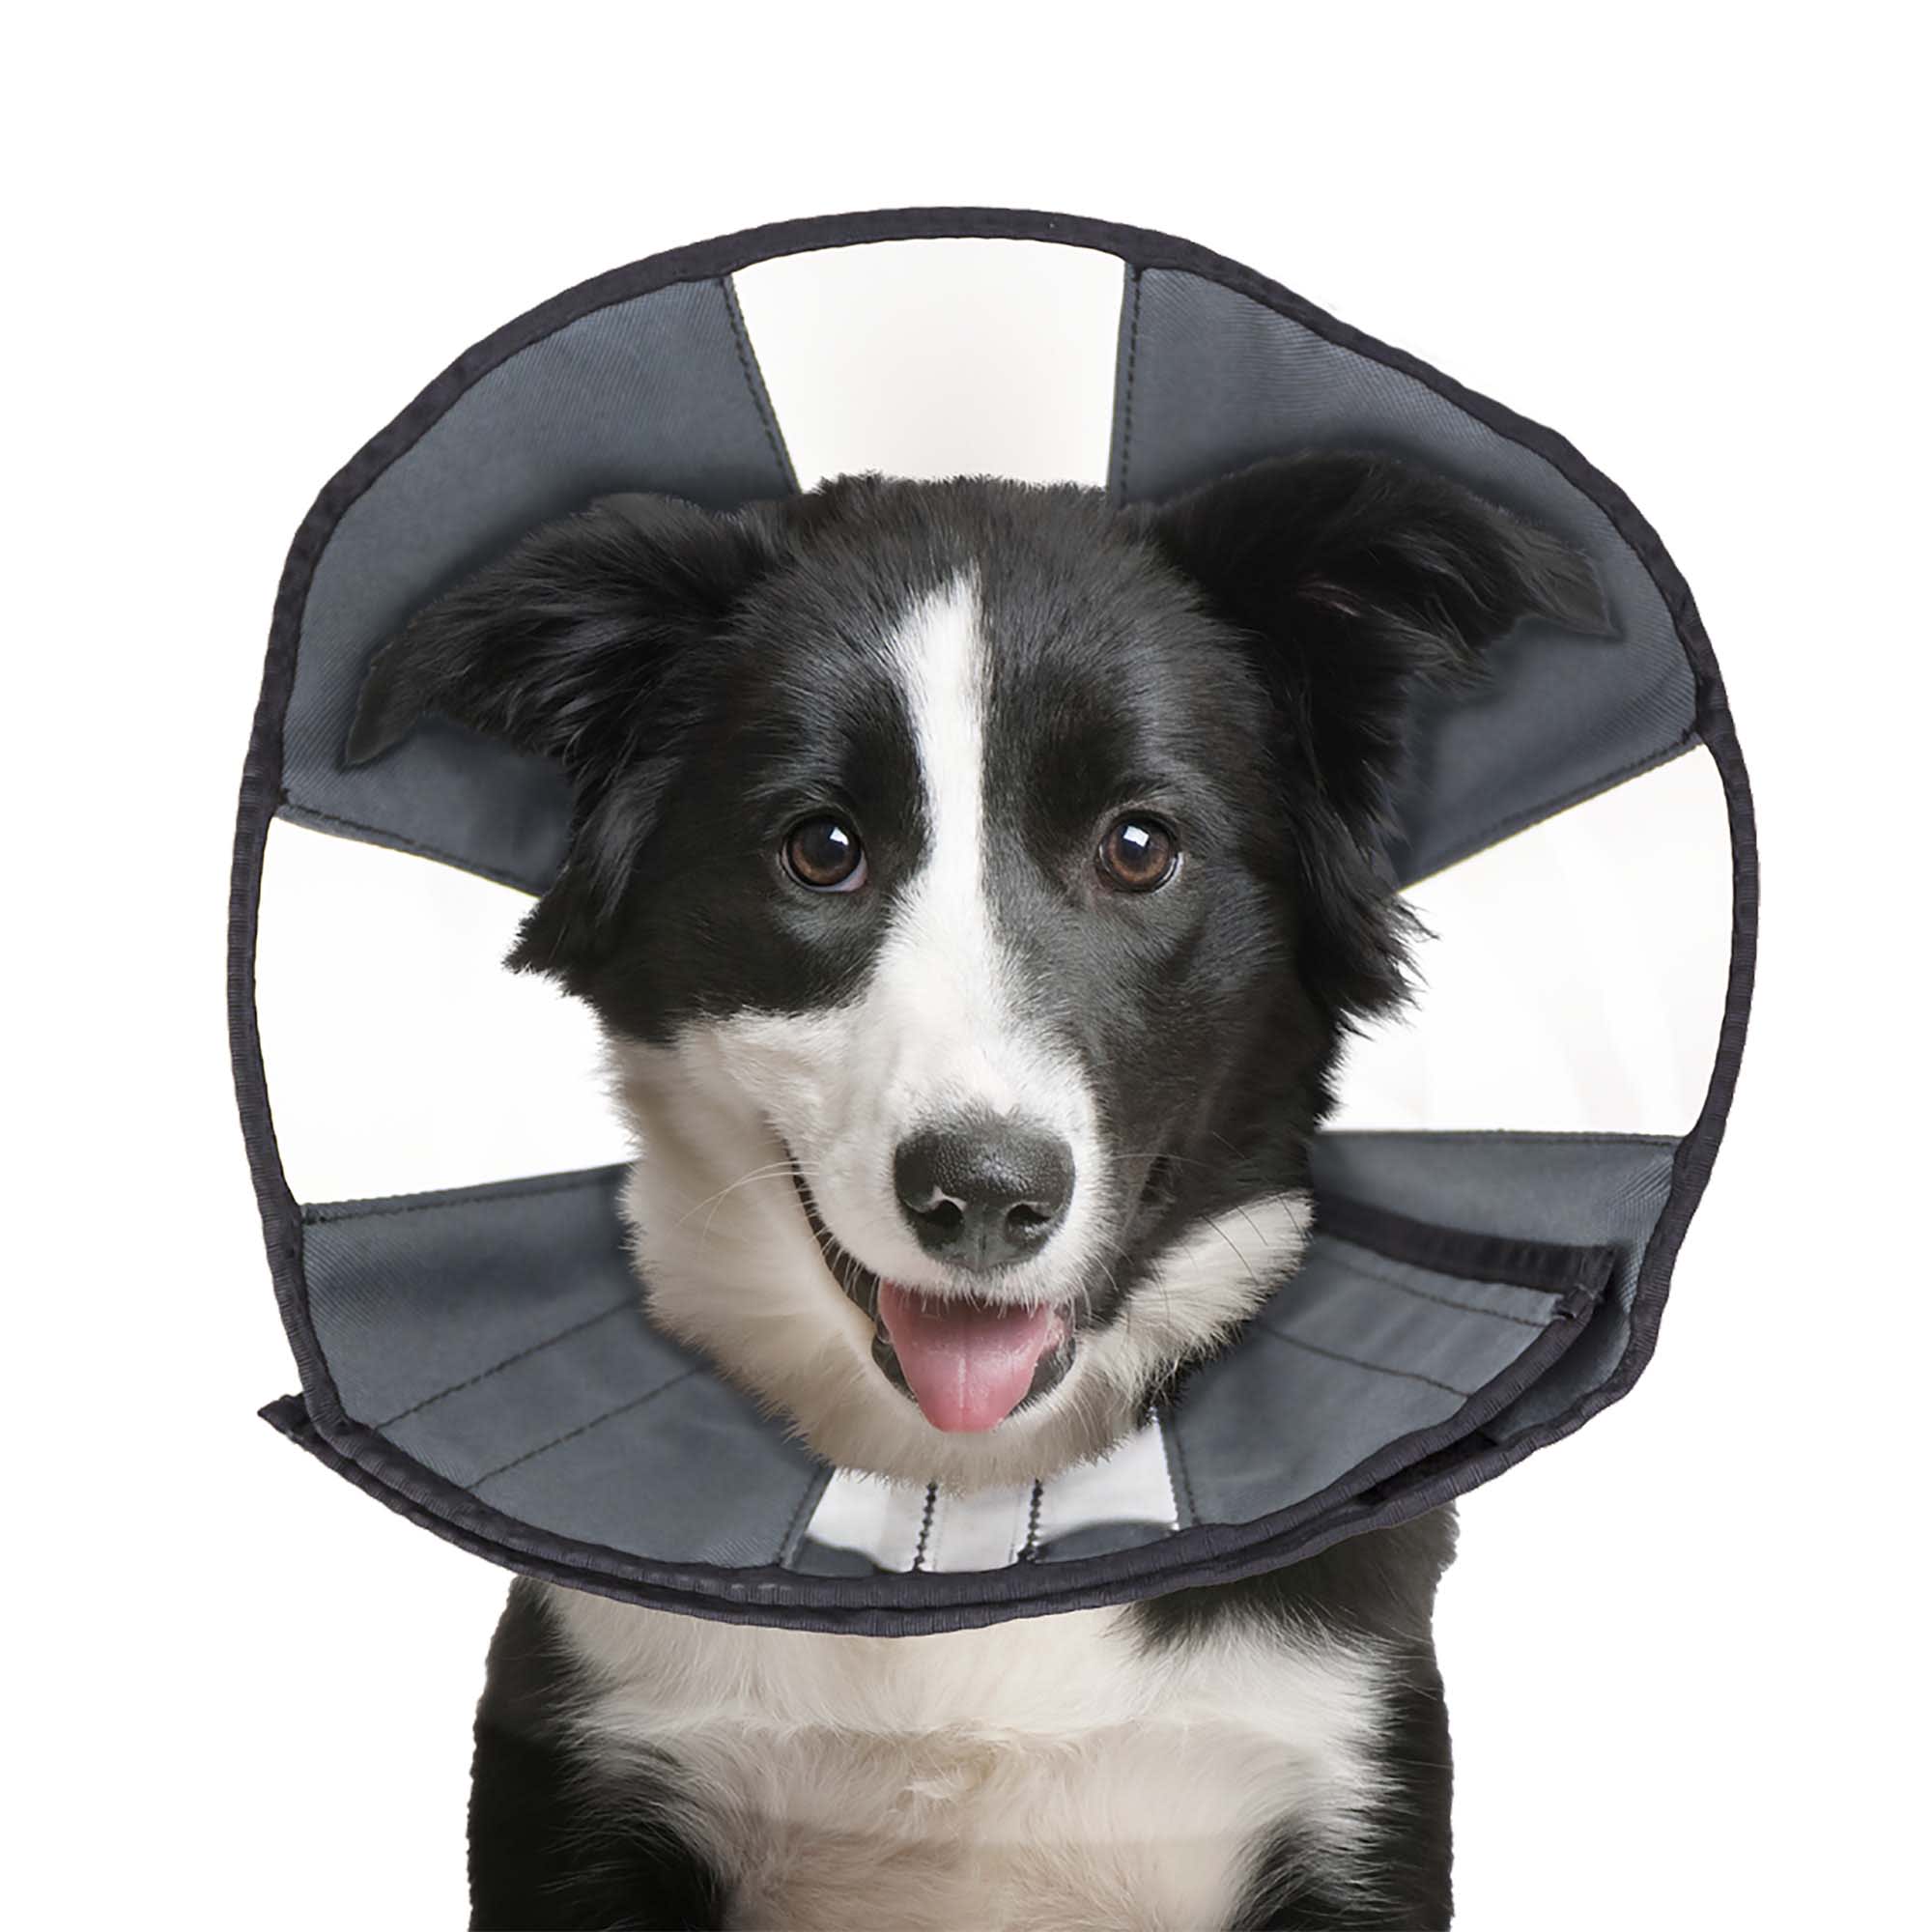 soft head cones for dogs